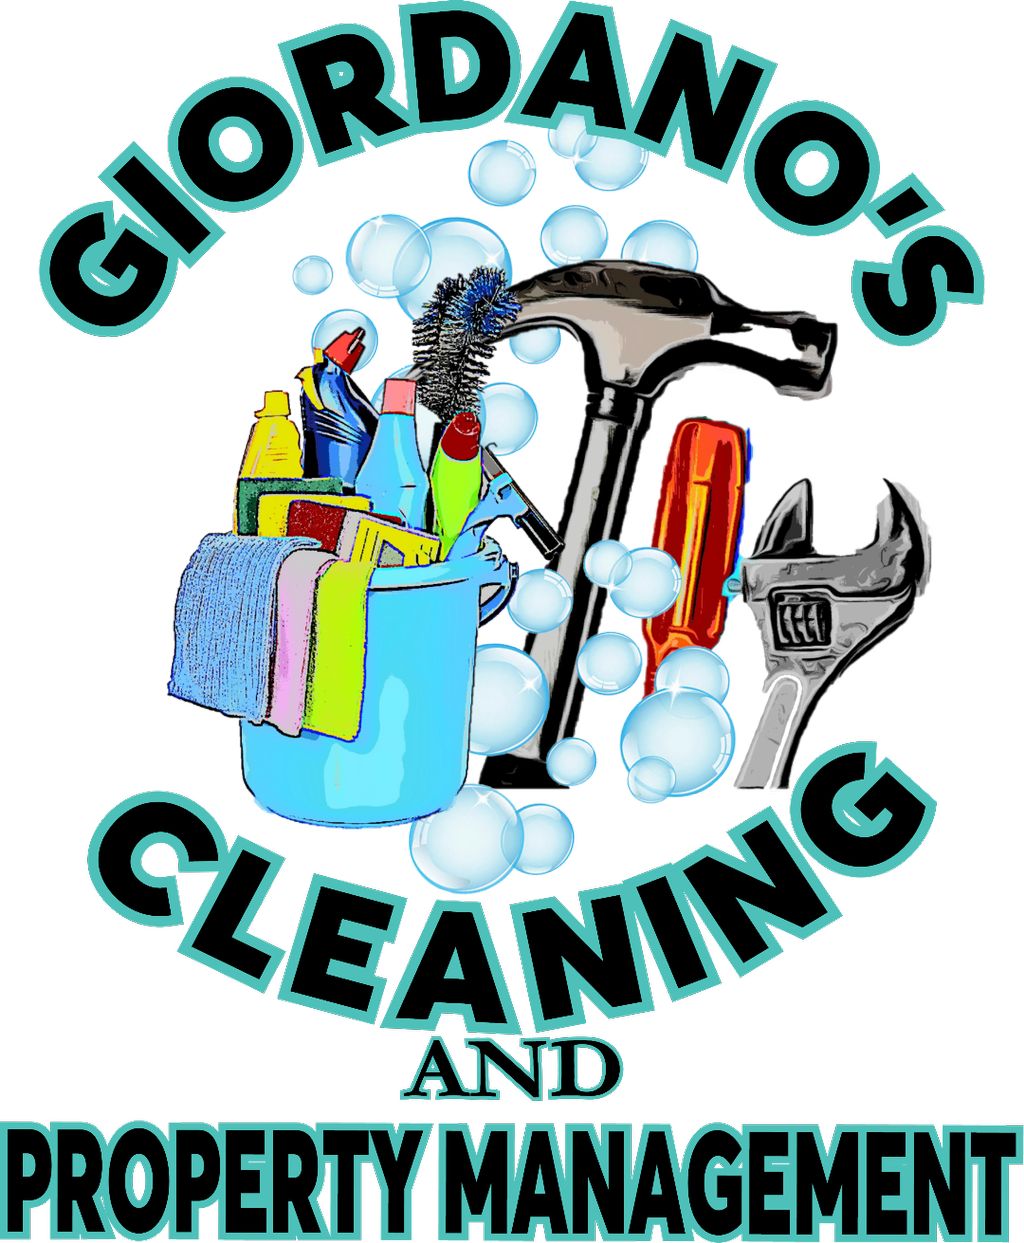 Giordano's Cleaning And Property Management LLC